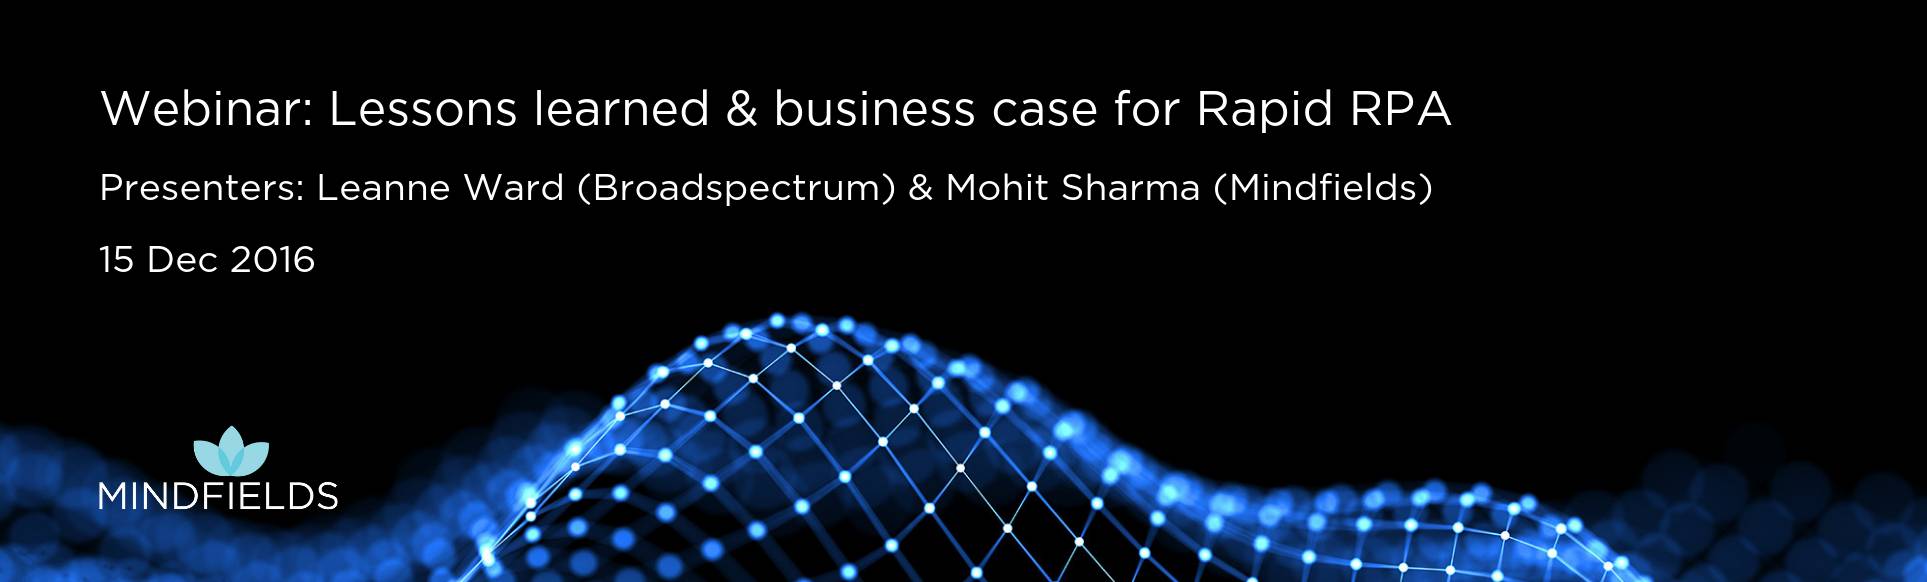 Rapid RPA Lessons and Business Cases